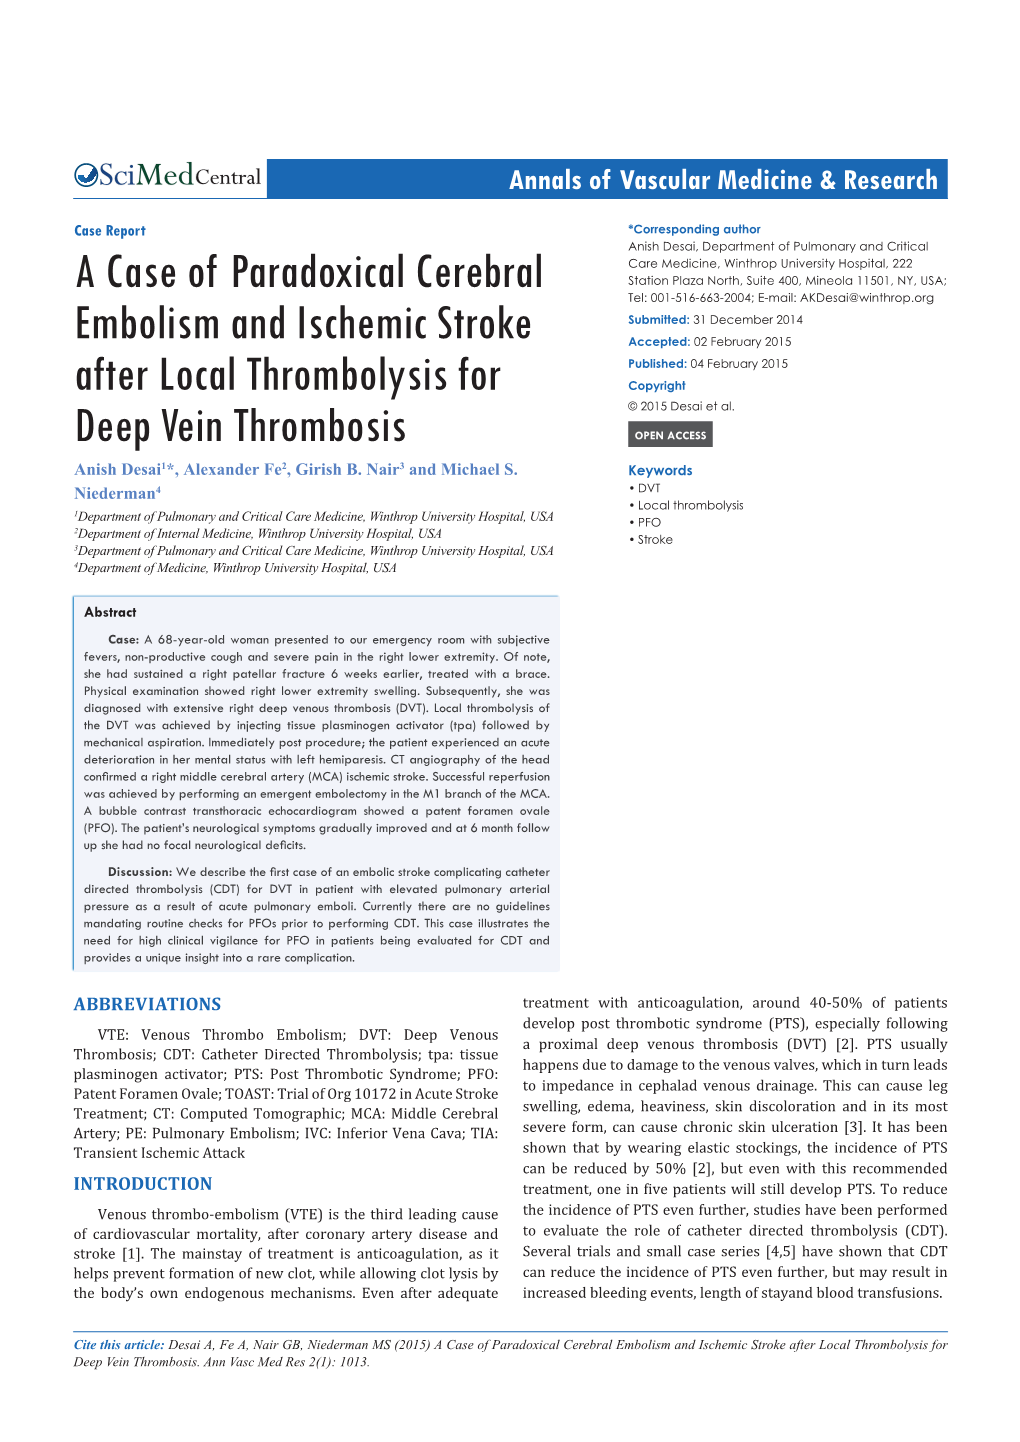 A Case of Paradoxical Cerebral Embolism and Ischemic Stroke After Local Thrombolysis for Deep Vein Thrombosis